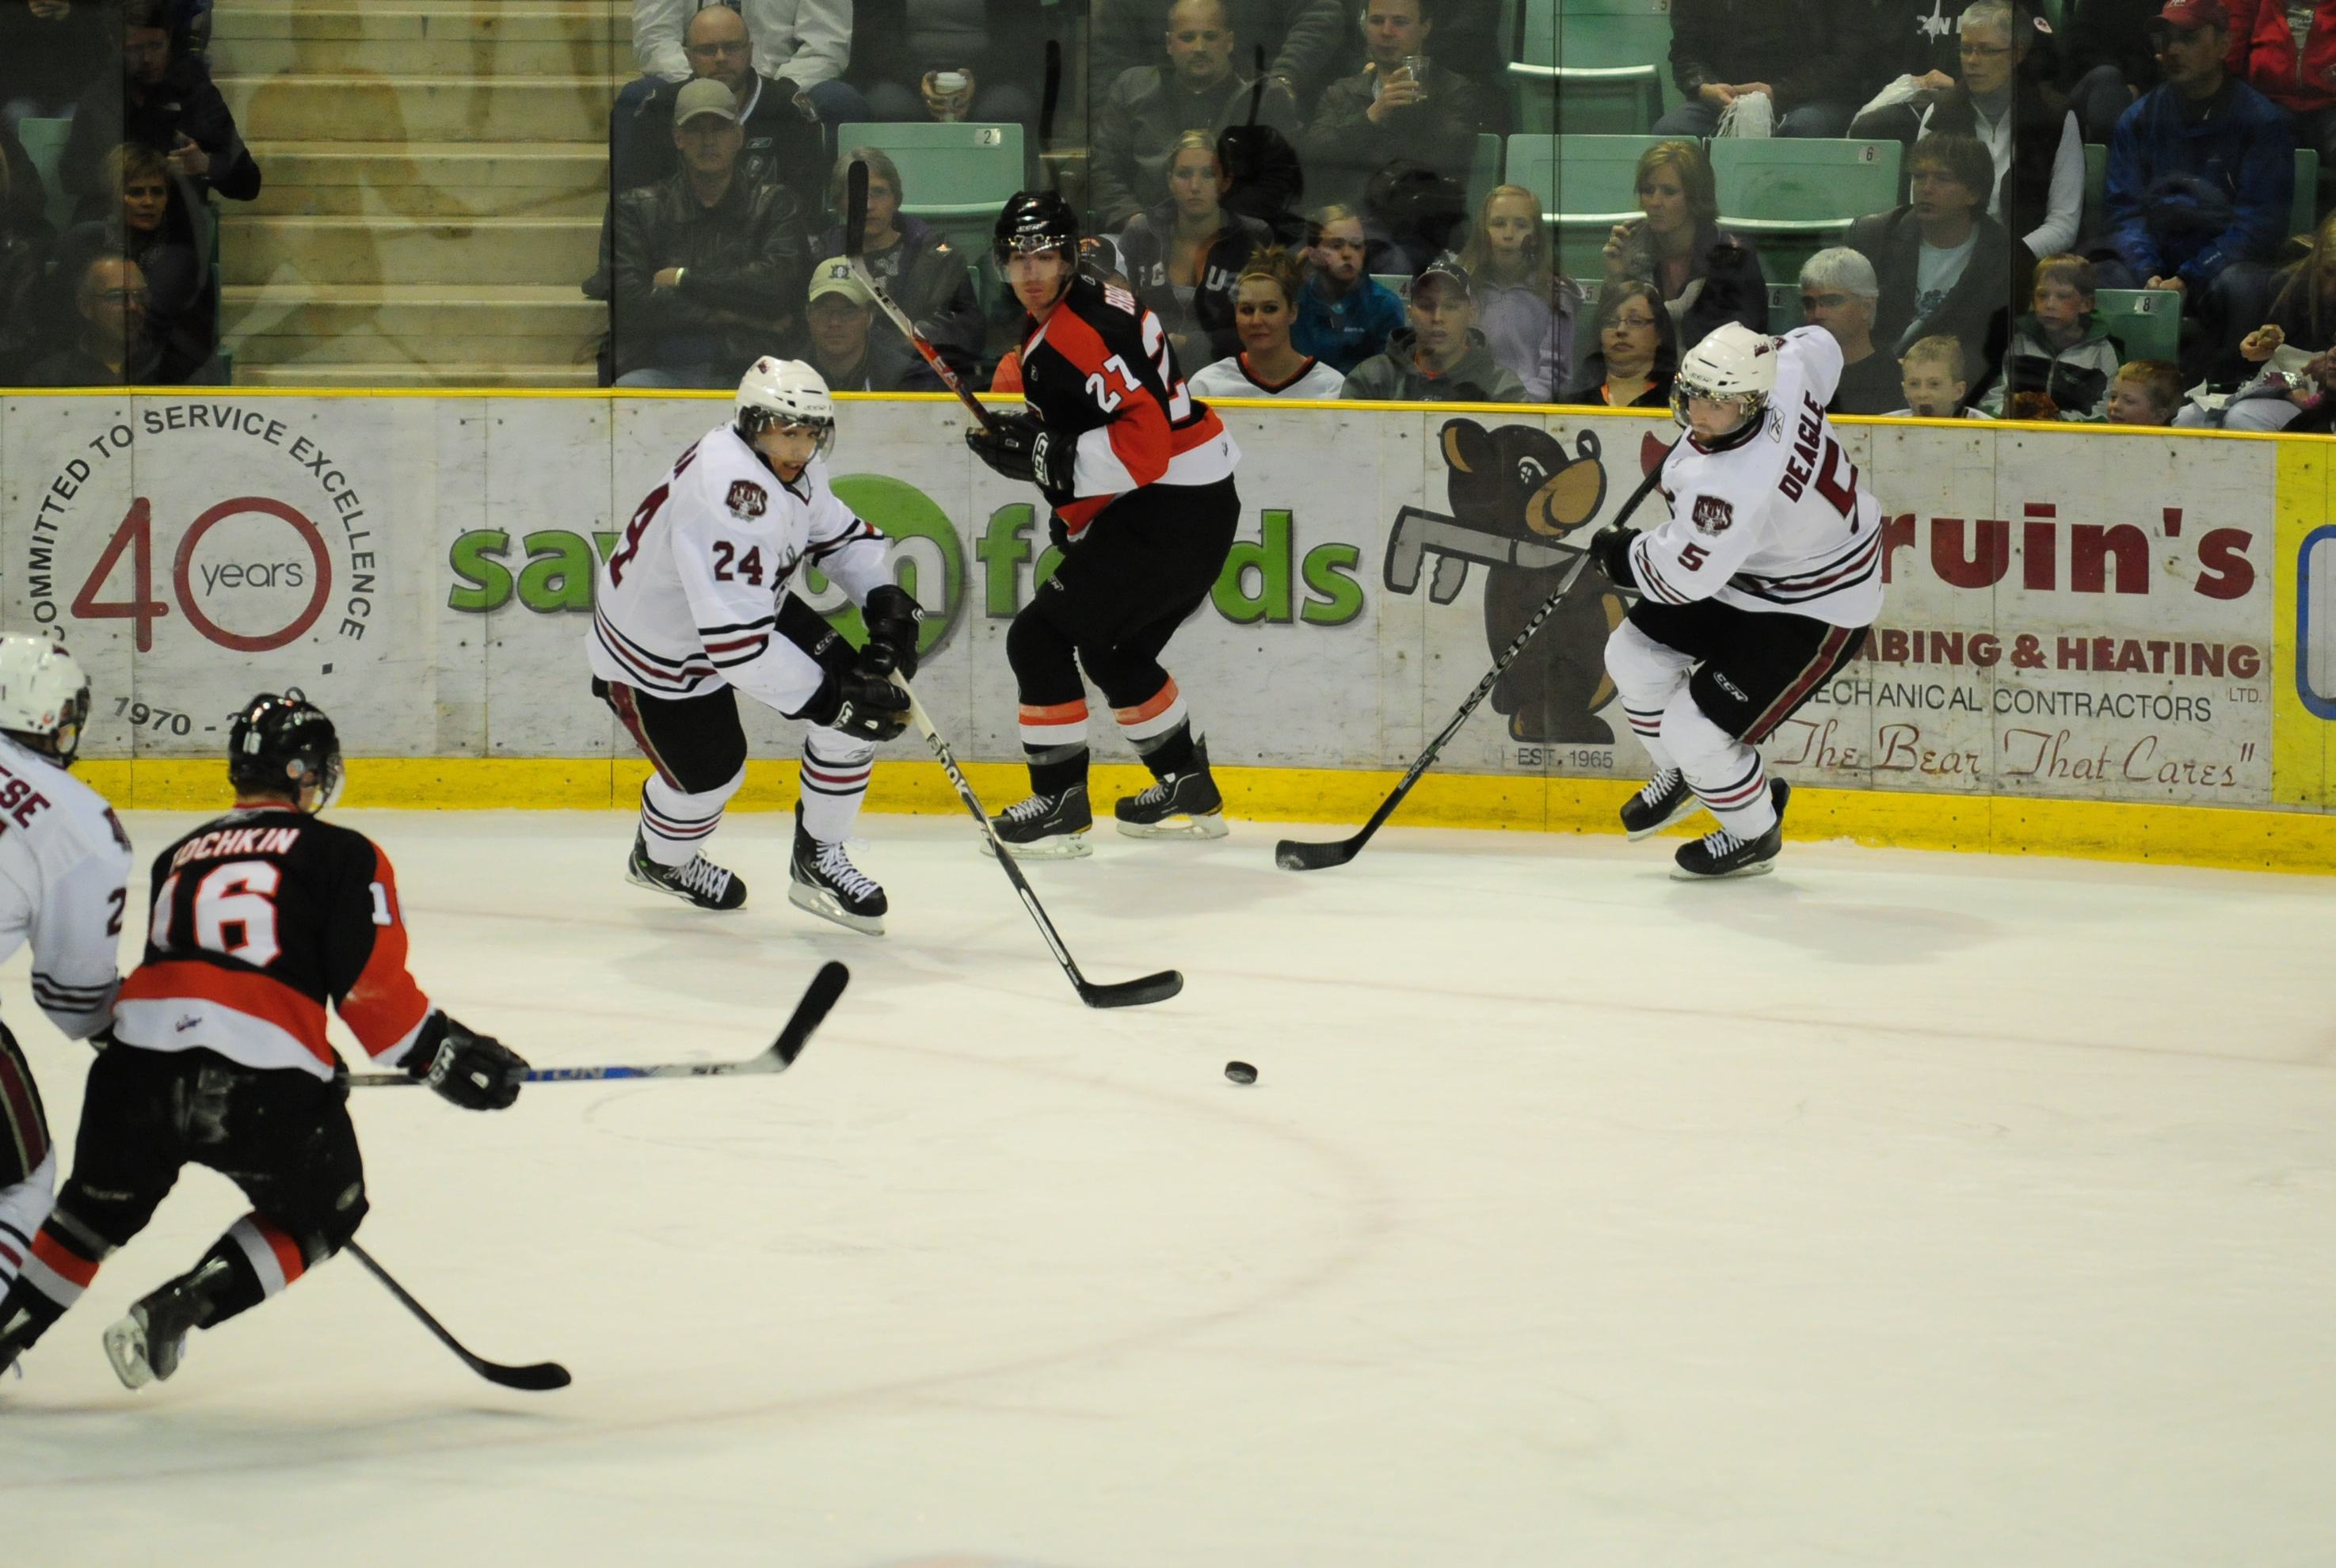 FINAL TRY- The Red Deer Rebels fought their last battle this past weekend but were unsuccessful in beating the Medicine Hat Tigers. The Rebels are now done their season losing Saturday night 4-5.